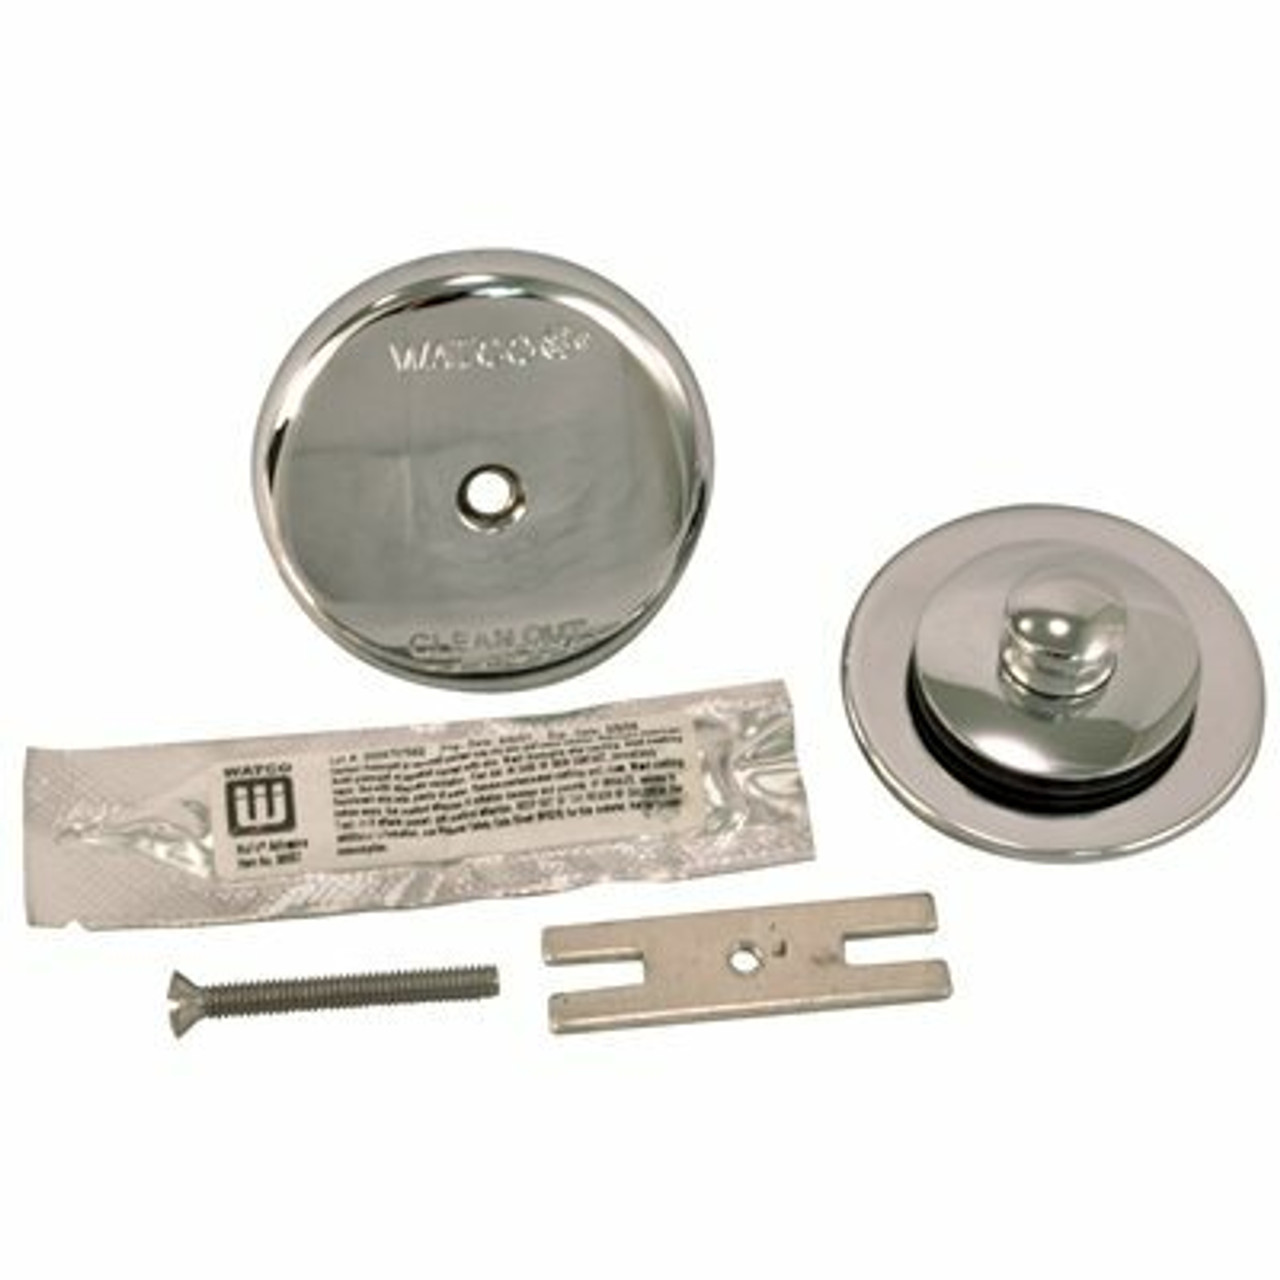 Watco Nufit Lift And Turn Bathtub Stopper With One Hole Overflow And Silicone Kit In Chrome Plated